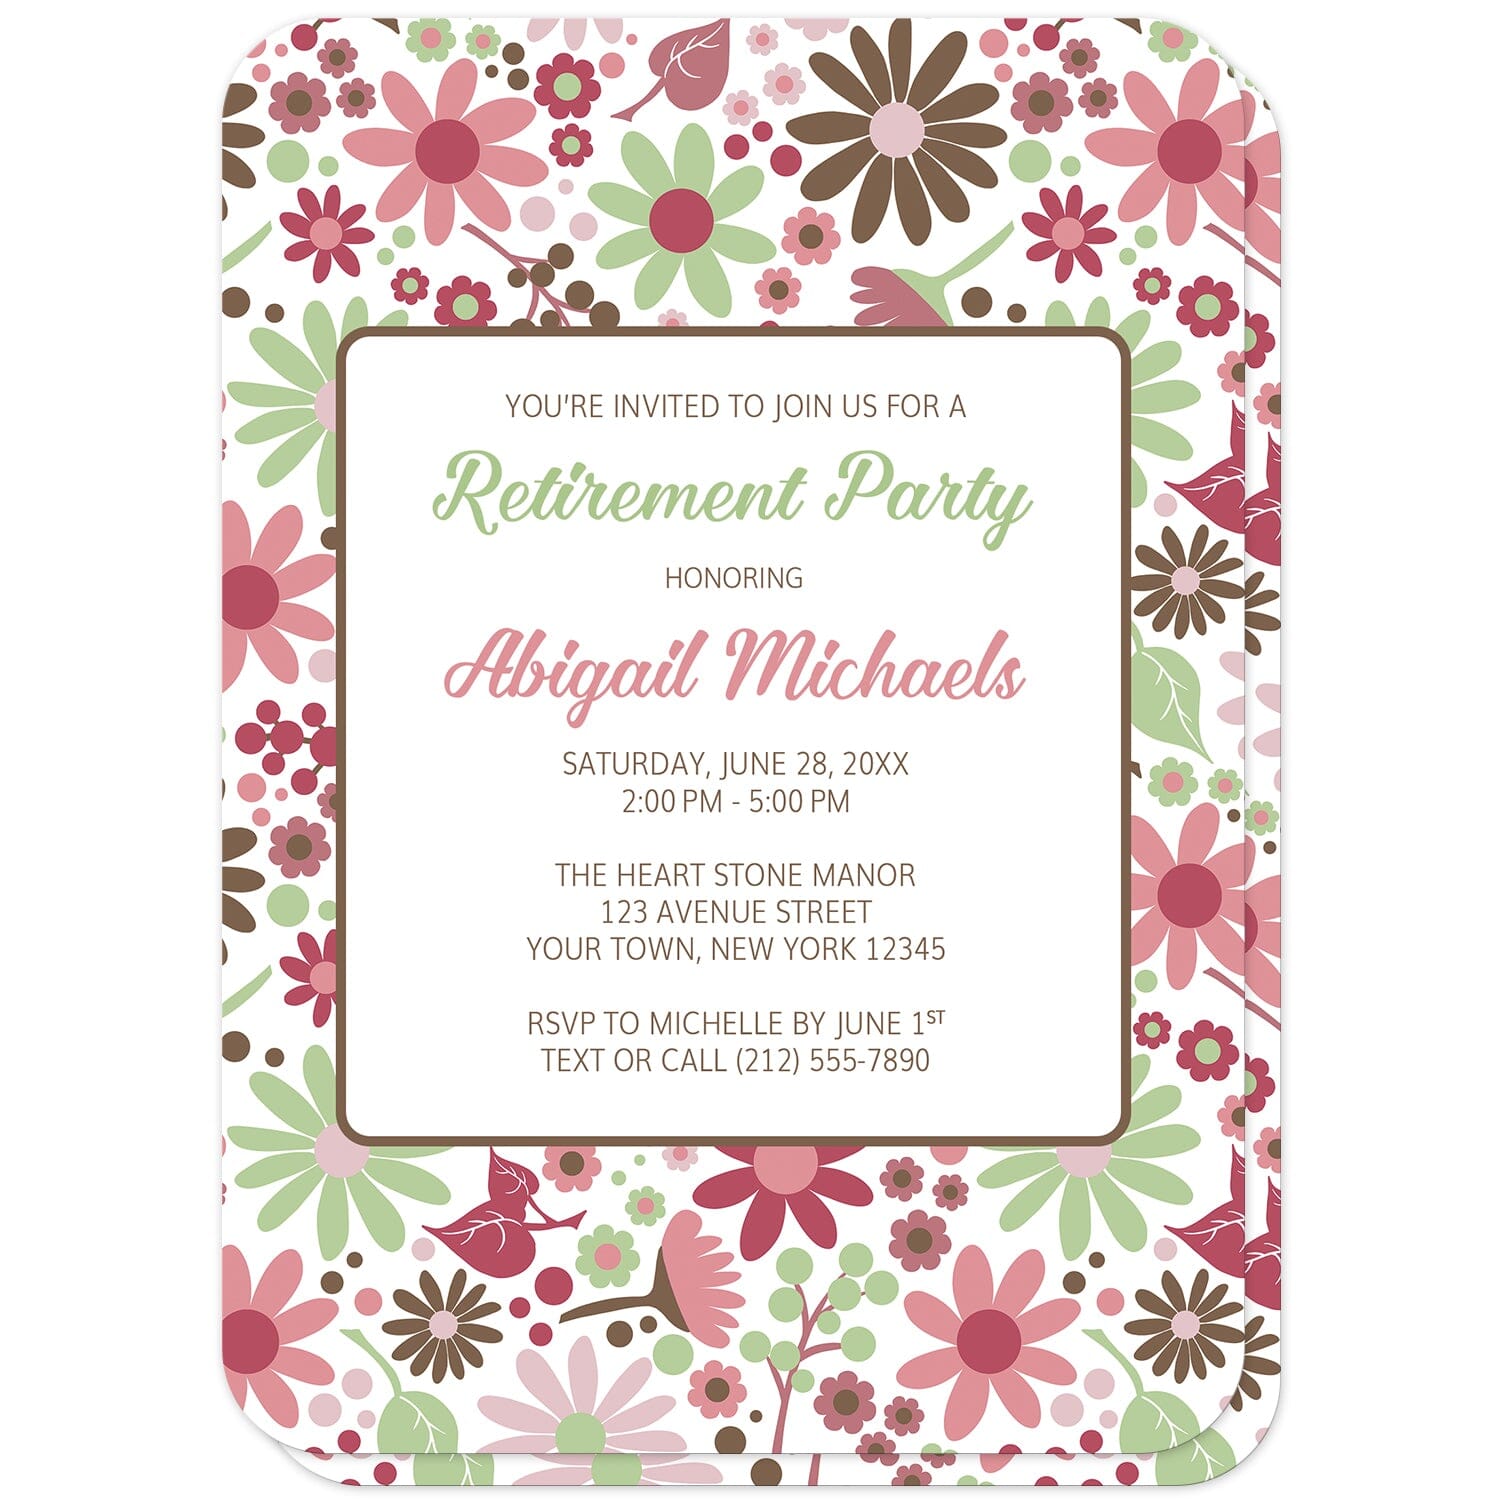 Berry Green Summer Flowers Retirement Party Invitations (front with rounded corners) at Artistically Invited. Beautiful berry green summer flowers retirement party invitations designed with a pretty summer floral pattern in different hues of berry pink with green and brown. Your personalizes retirement party details are custom printed in green, pink, and brown over white in the center area of the invitations.